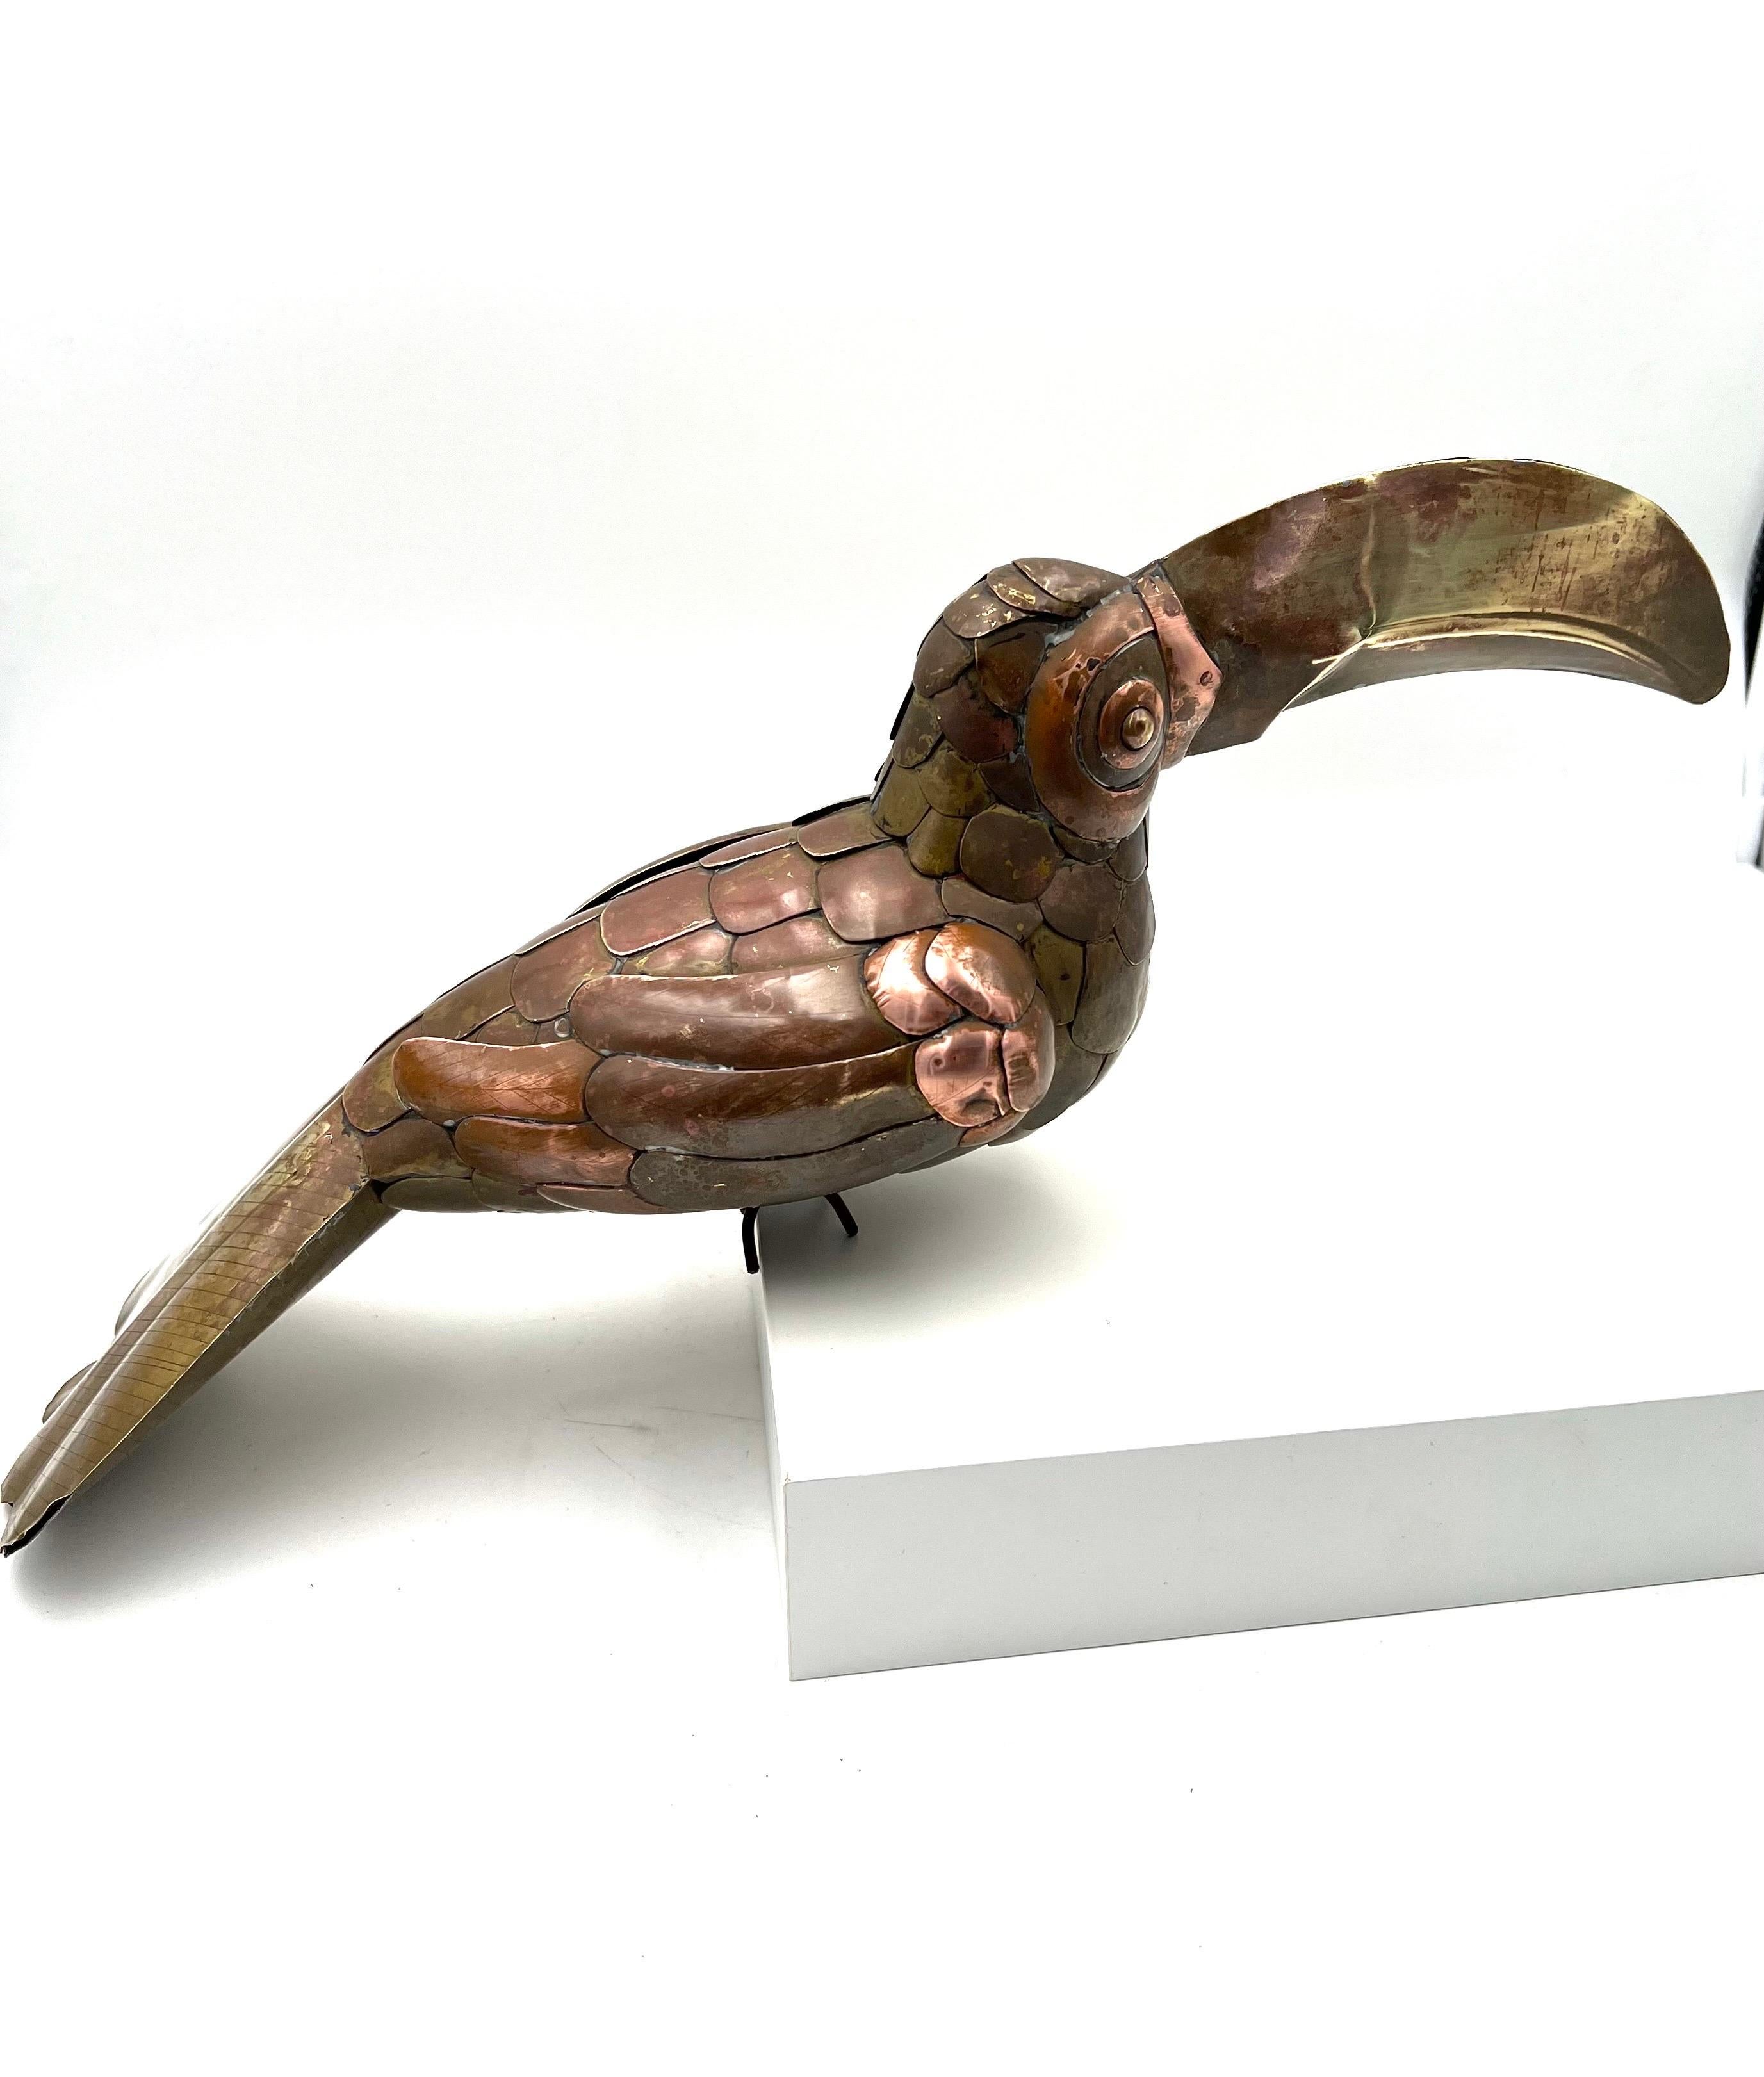 Whimsical Toucan parrot bird sculpture, by Sergio Bustamante, as found condition with patina and dings and bends, sol AS/IS condition.